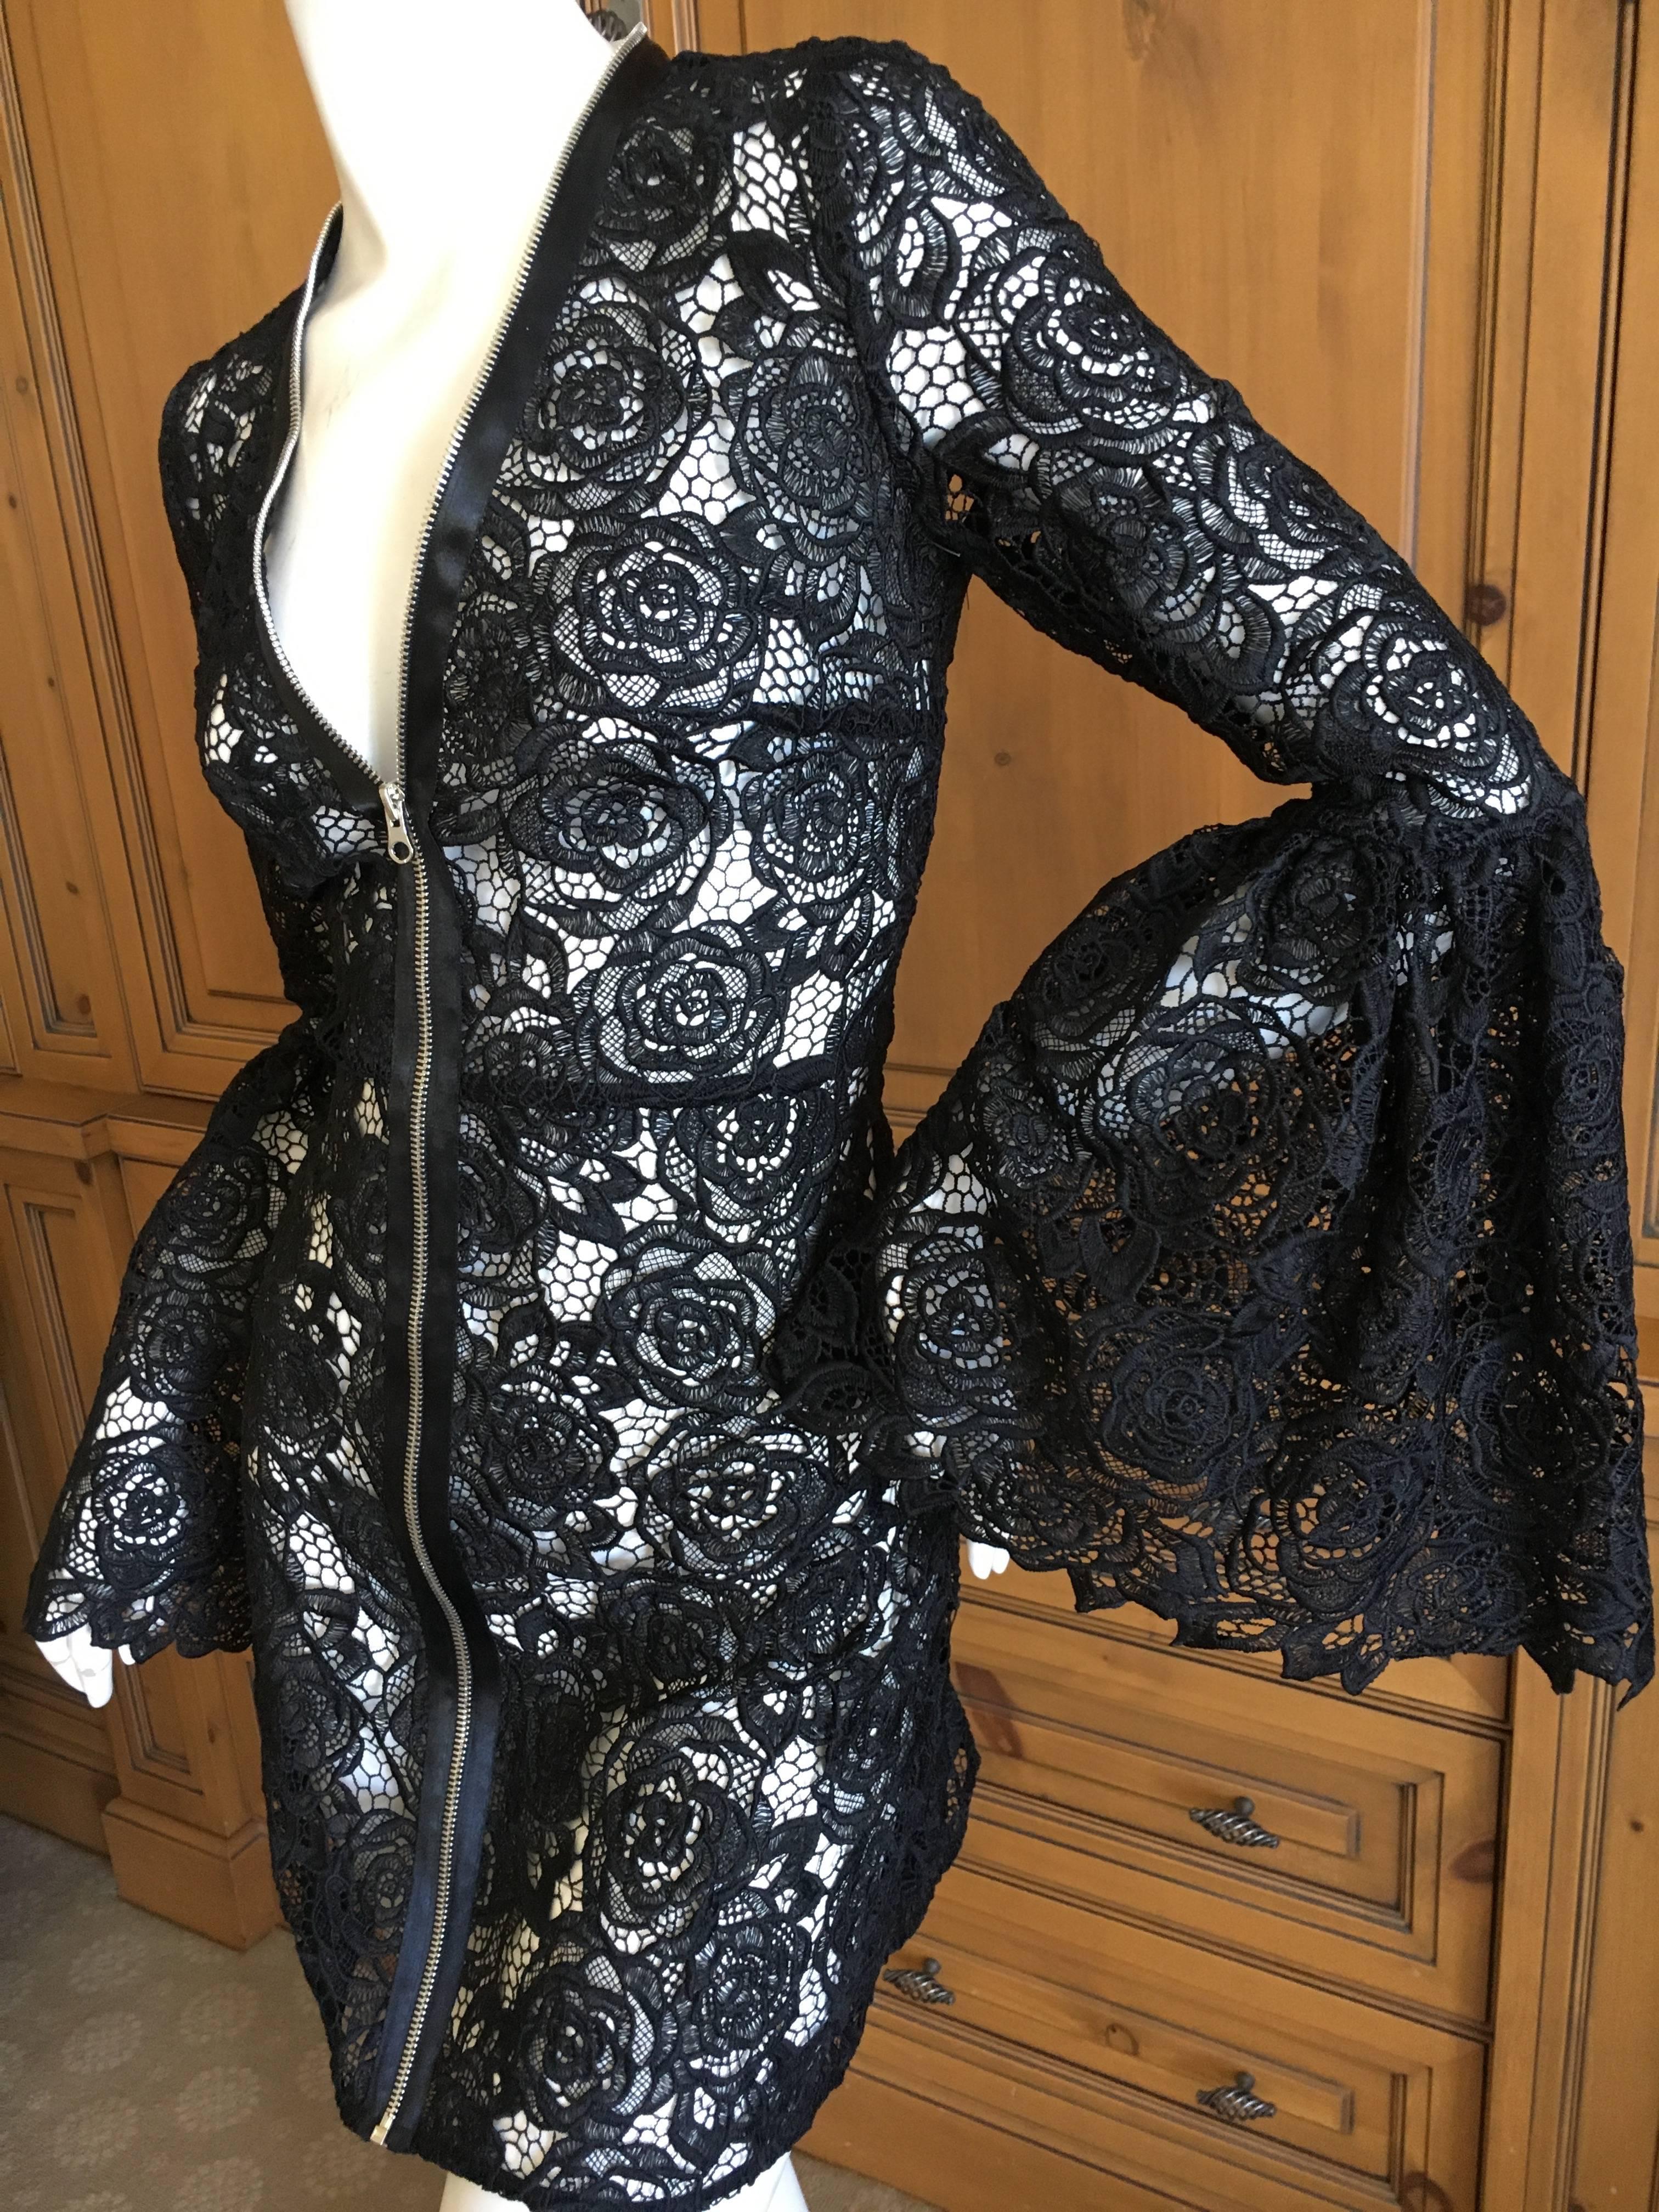 McQ Alexander McQueen Black Lace Bell Sleeve Dress In Excellent Condition For Sale In Cloverdale, CA